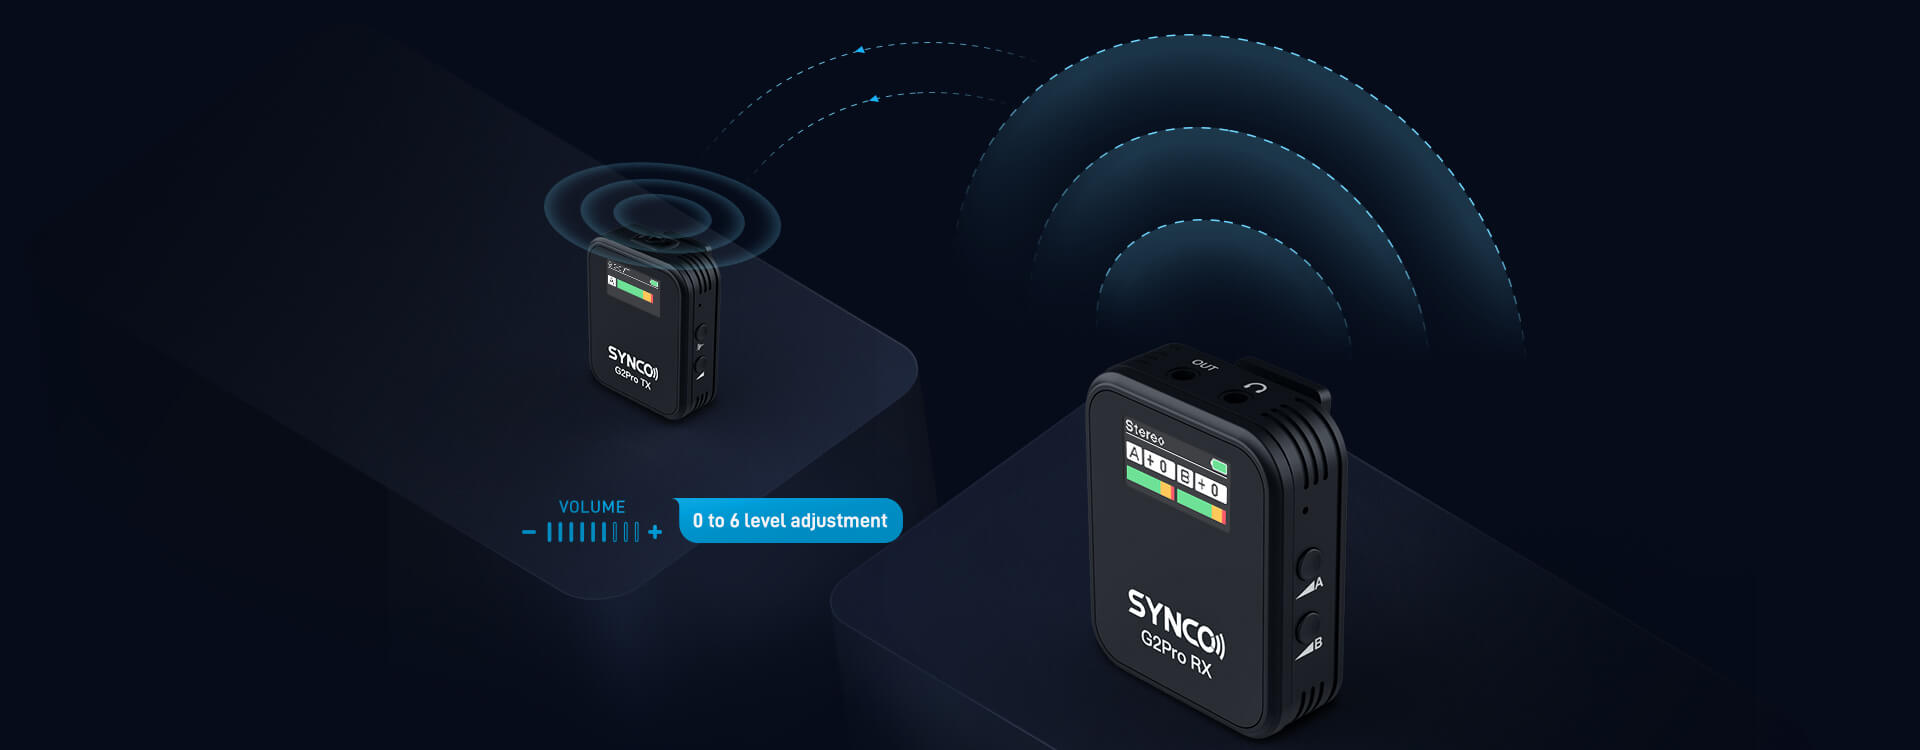 SYNCO G2 Pro features 0 to 6 level audio adjustment.